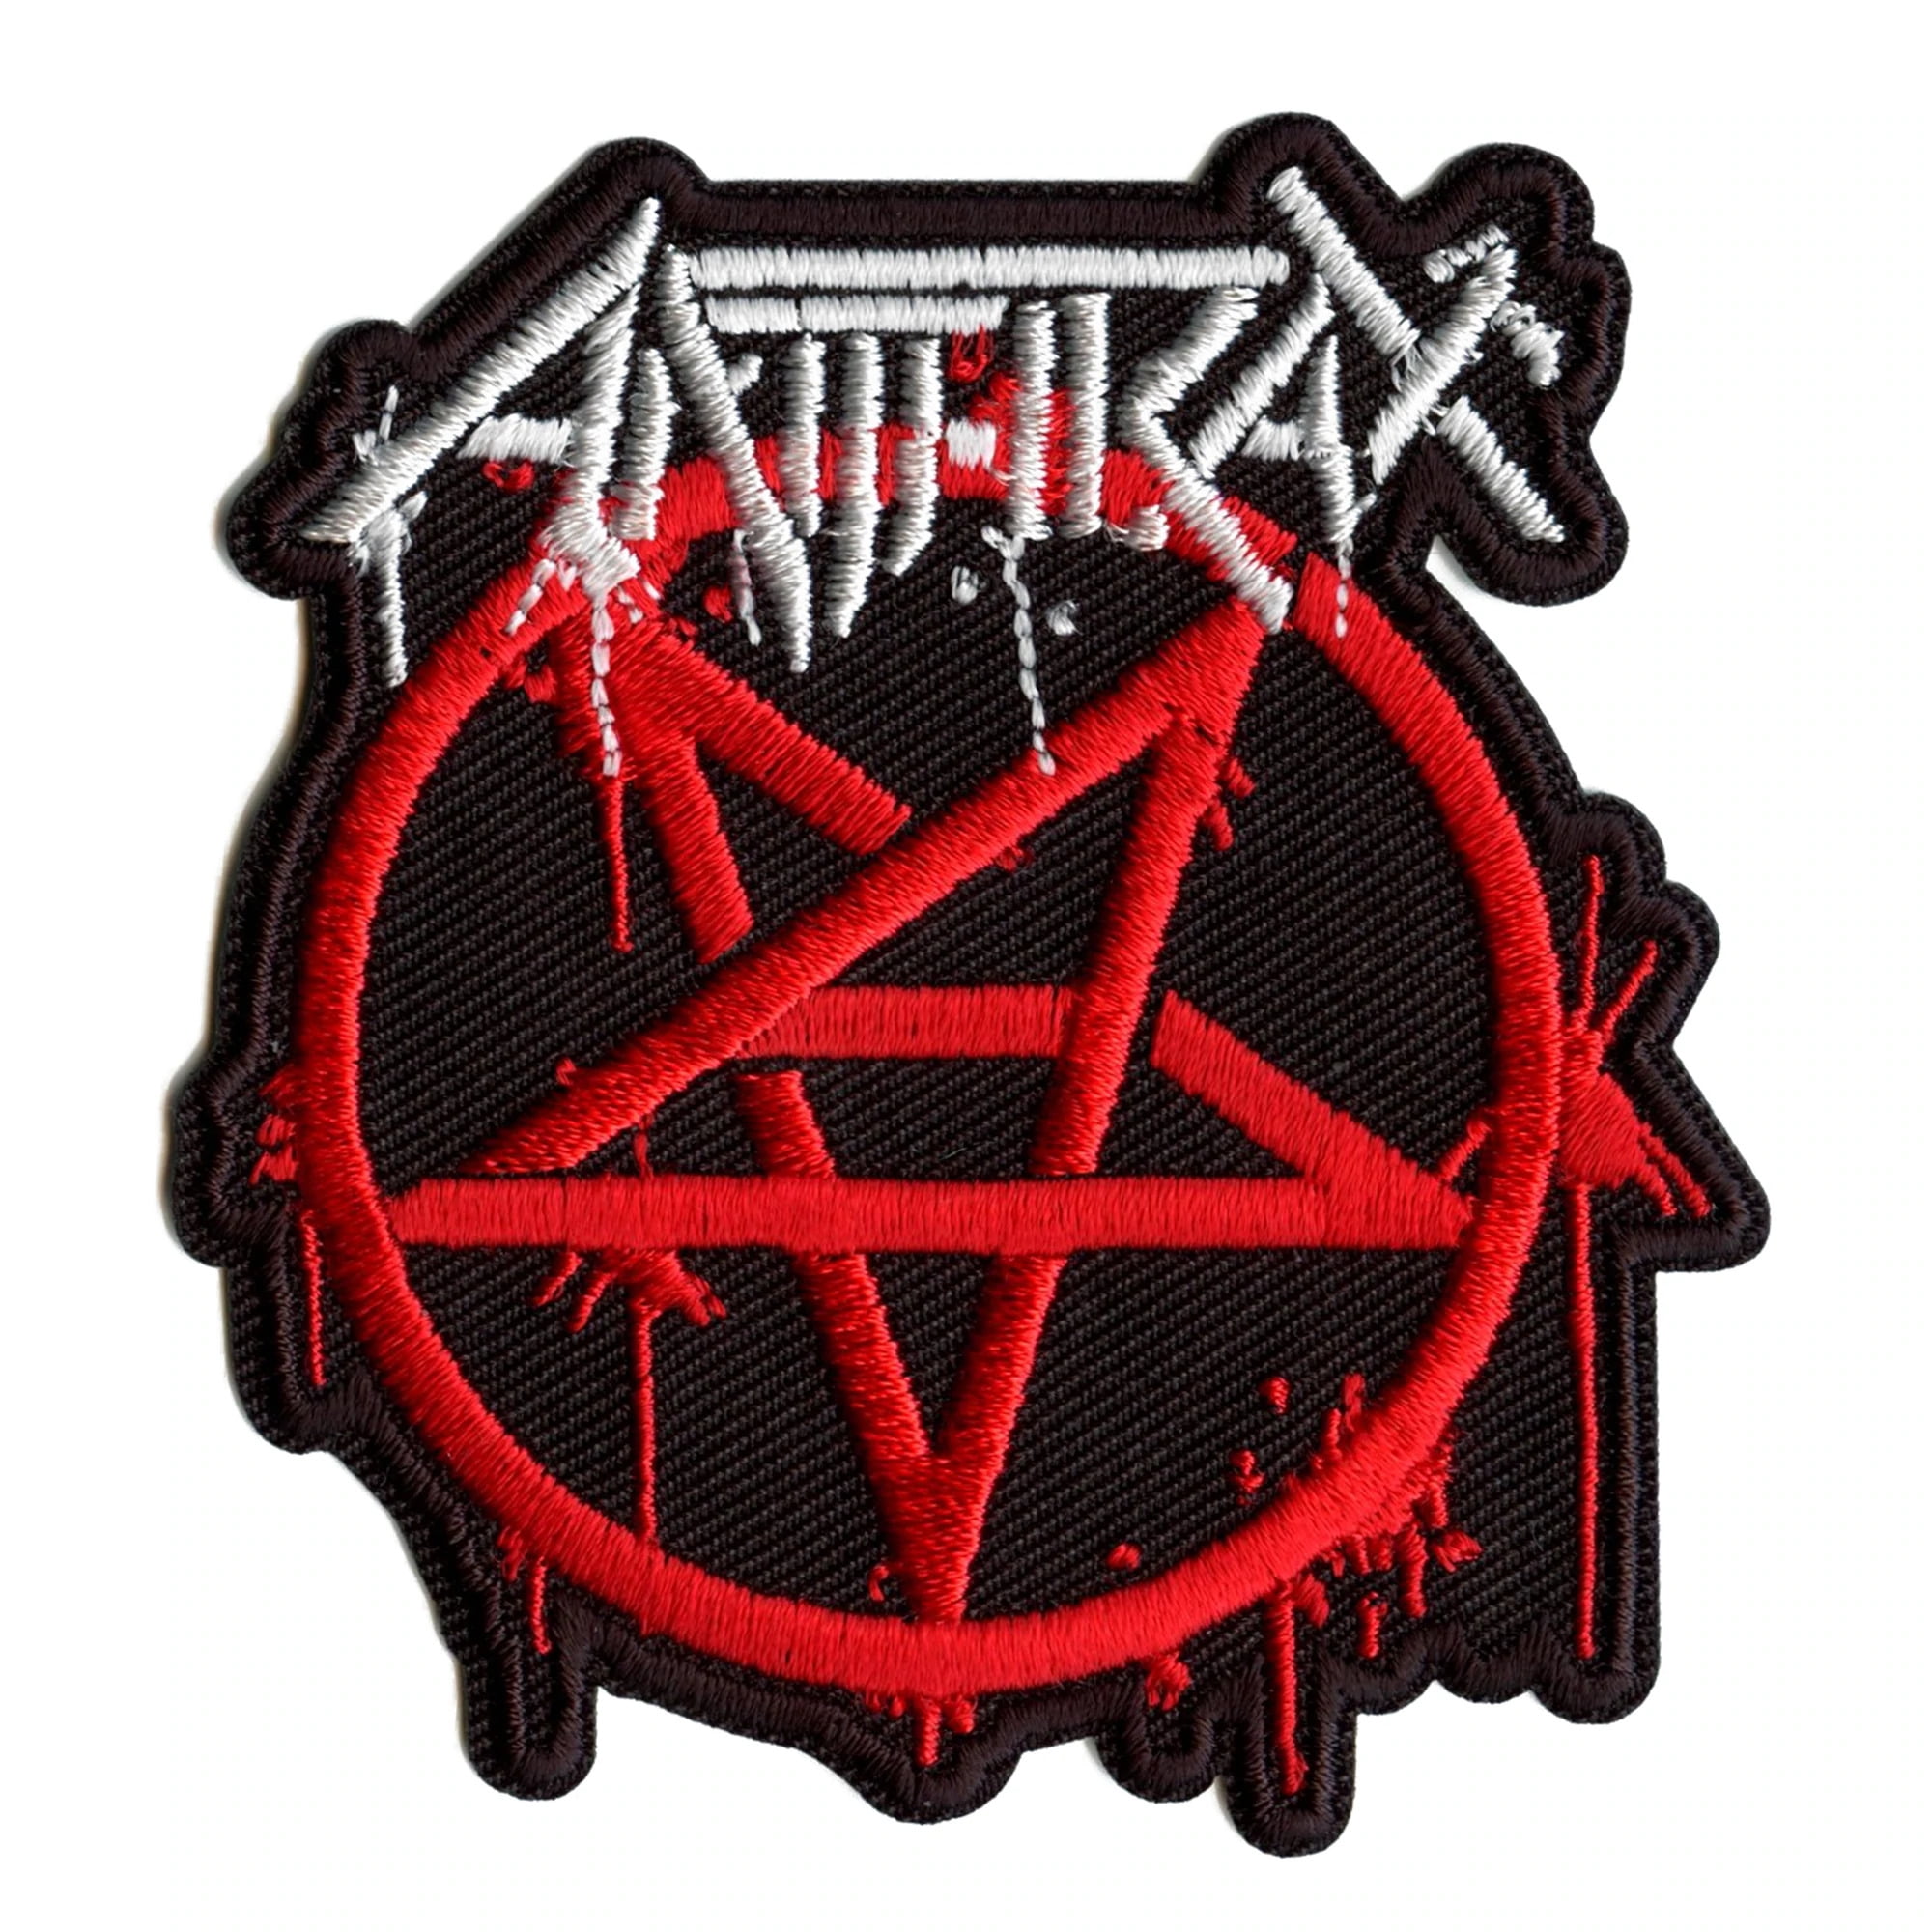 Anthrax Patch Sew or Iron On a 